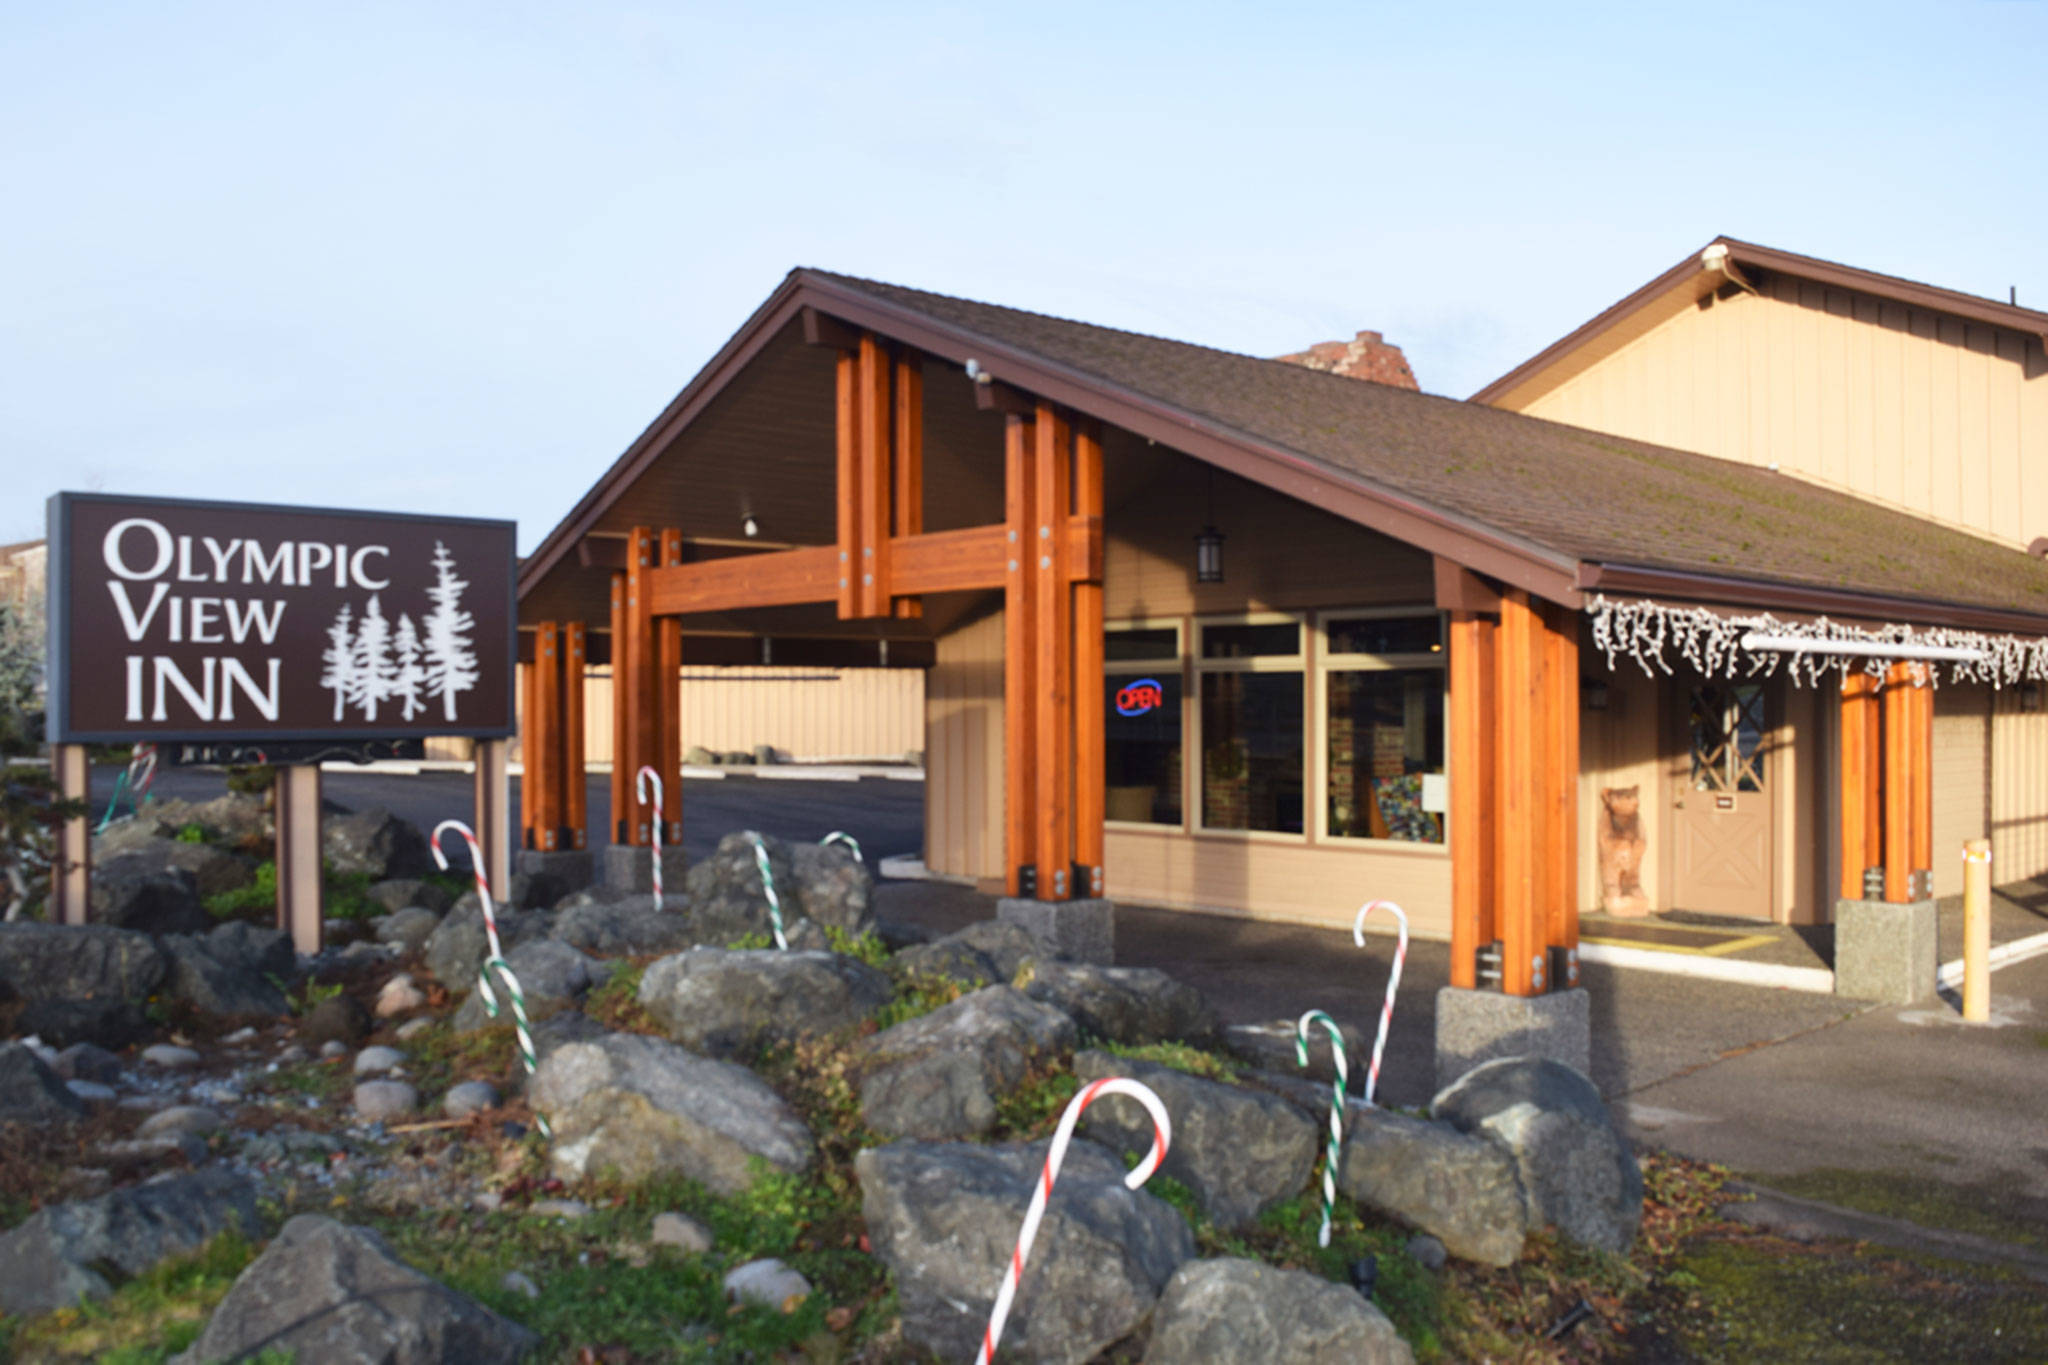 Olympic View Inn is under new ownership by Chintu Patel, a Forks resident, who bought the hotel and its property for about $2.6 million in November. He plans on keeping the hotel independent. “Being independent we can offer so much more service than with a franchise,” Patel said. Sequim Gazette photo by Erin Hawkins